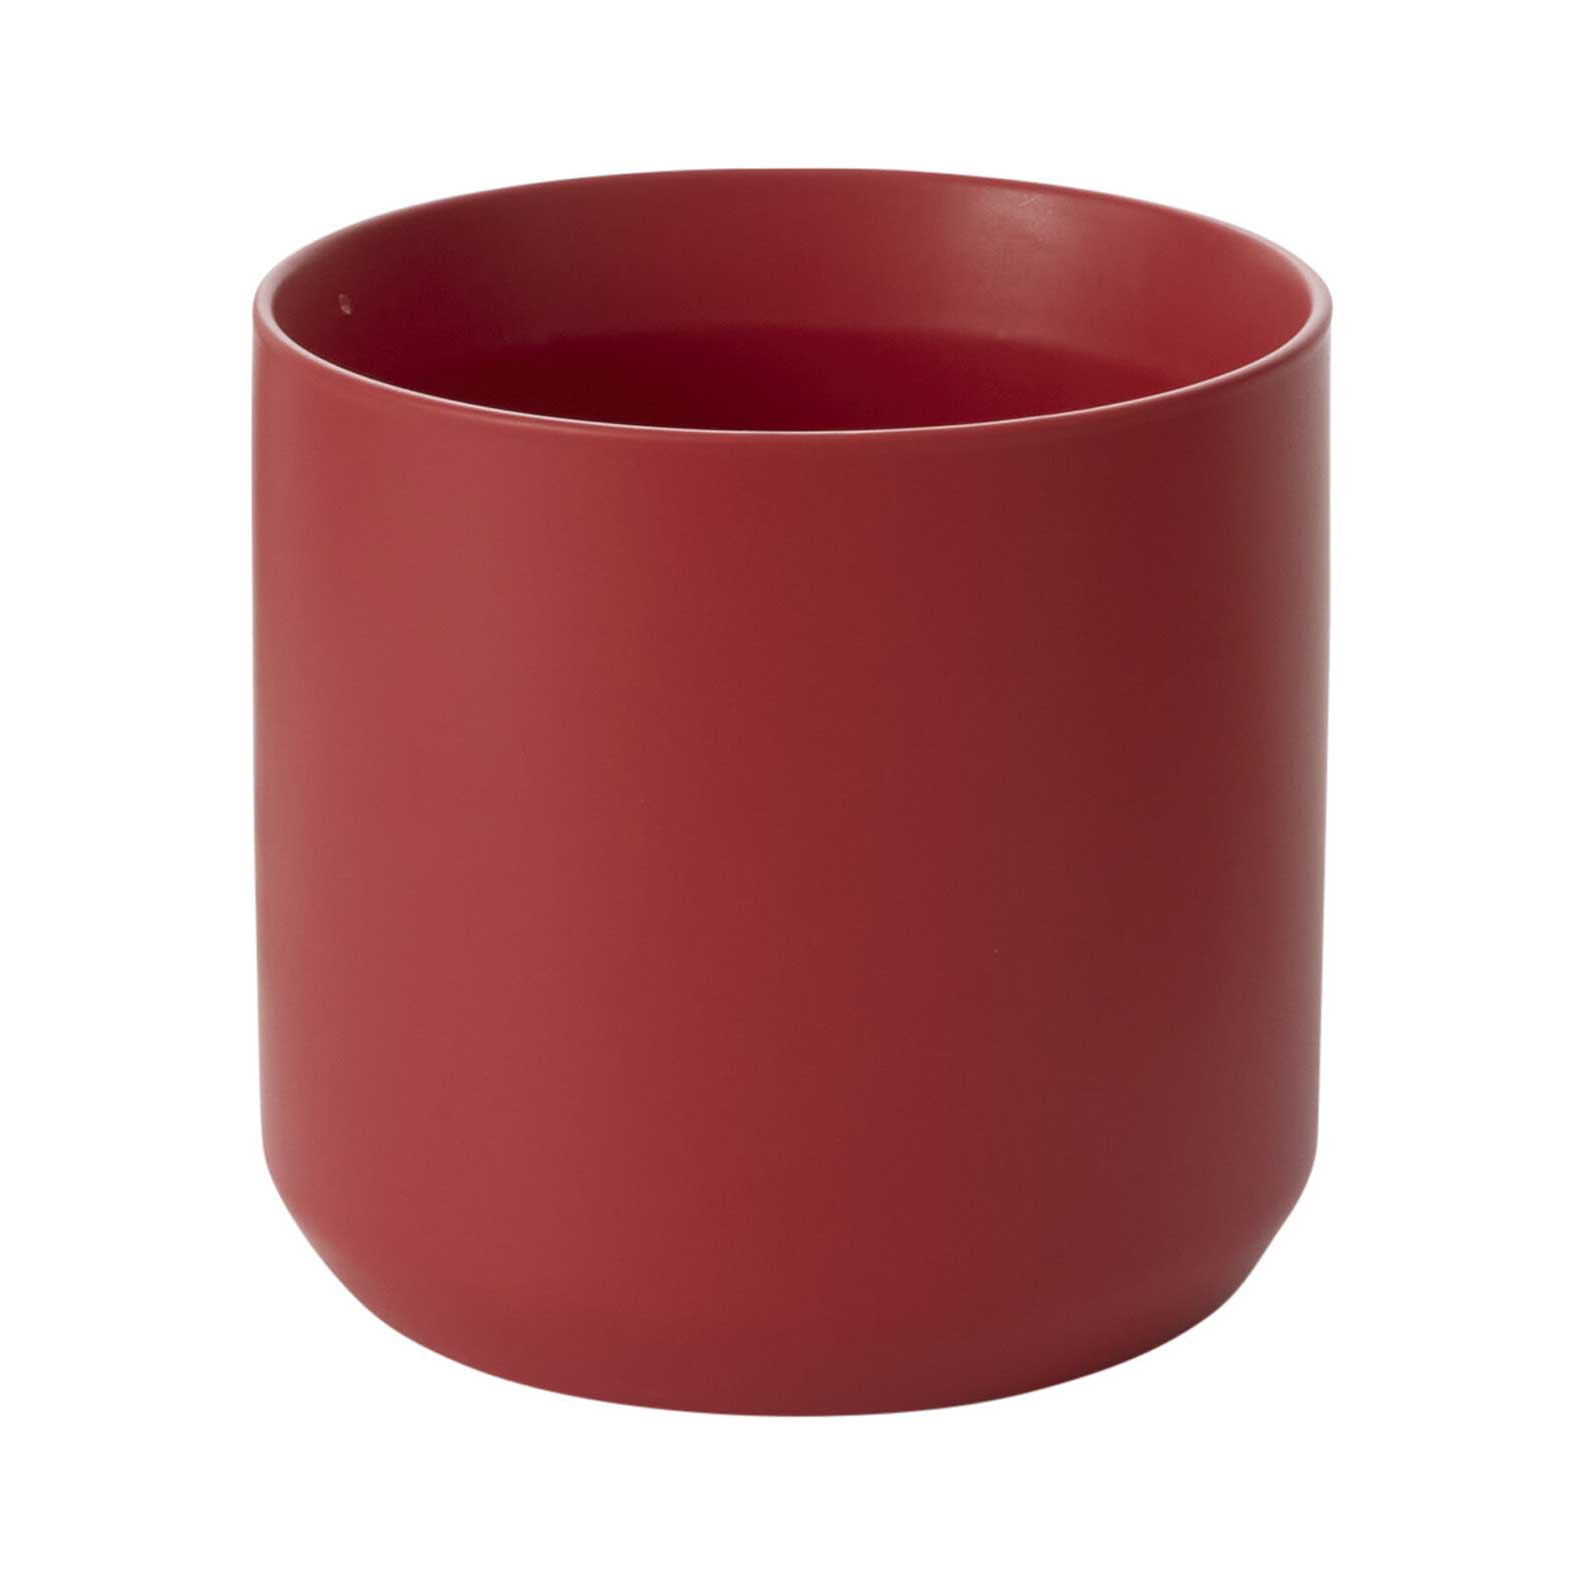 Accent_Decor_Red_Kendall_Pot_97522